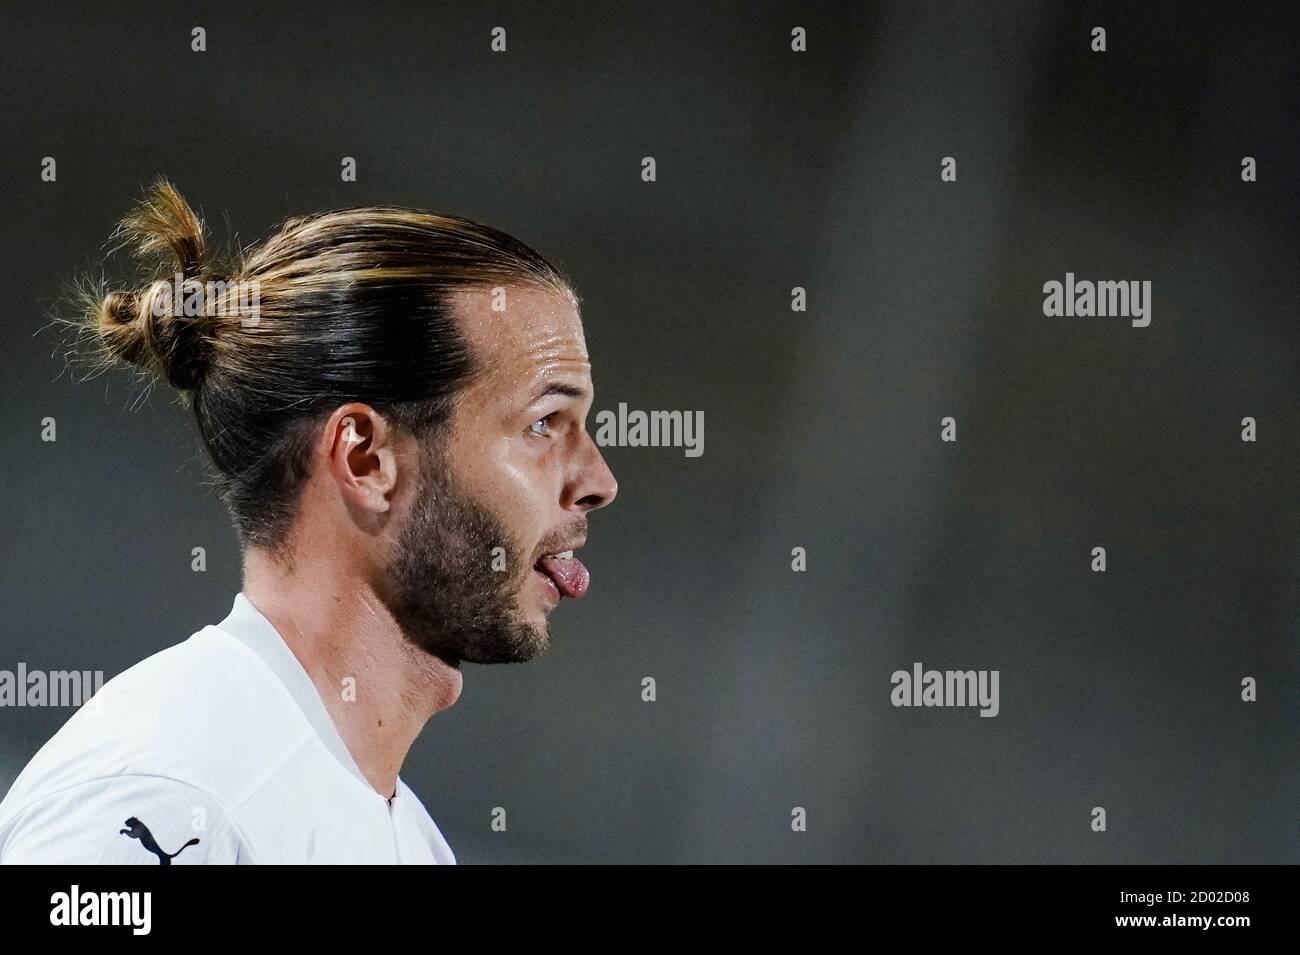 Sandhausen, Germany. 02nd Oct, 2020. Football: 2nd Bundesliga, SV Sandhausen - FC St. Pauli, 3rd matchday, Hardtwaldstadion. Sandhausen's Dennis Diekmeier sticks out his tongue. Credit: Uwe Anspach/dpa - IMPORTANT NOTE: In accordance with the regulations of the DFL Deutsche Fußball Liga and the DFB Deutscher Fußball-Bund, it is prohibited to exploit or have exploited in the stadium and/or from the game taken photographs in the form of sequence images and/or video-like photo series./dpa/Alamy Live News Stock Photo